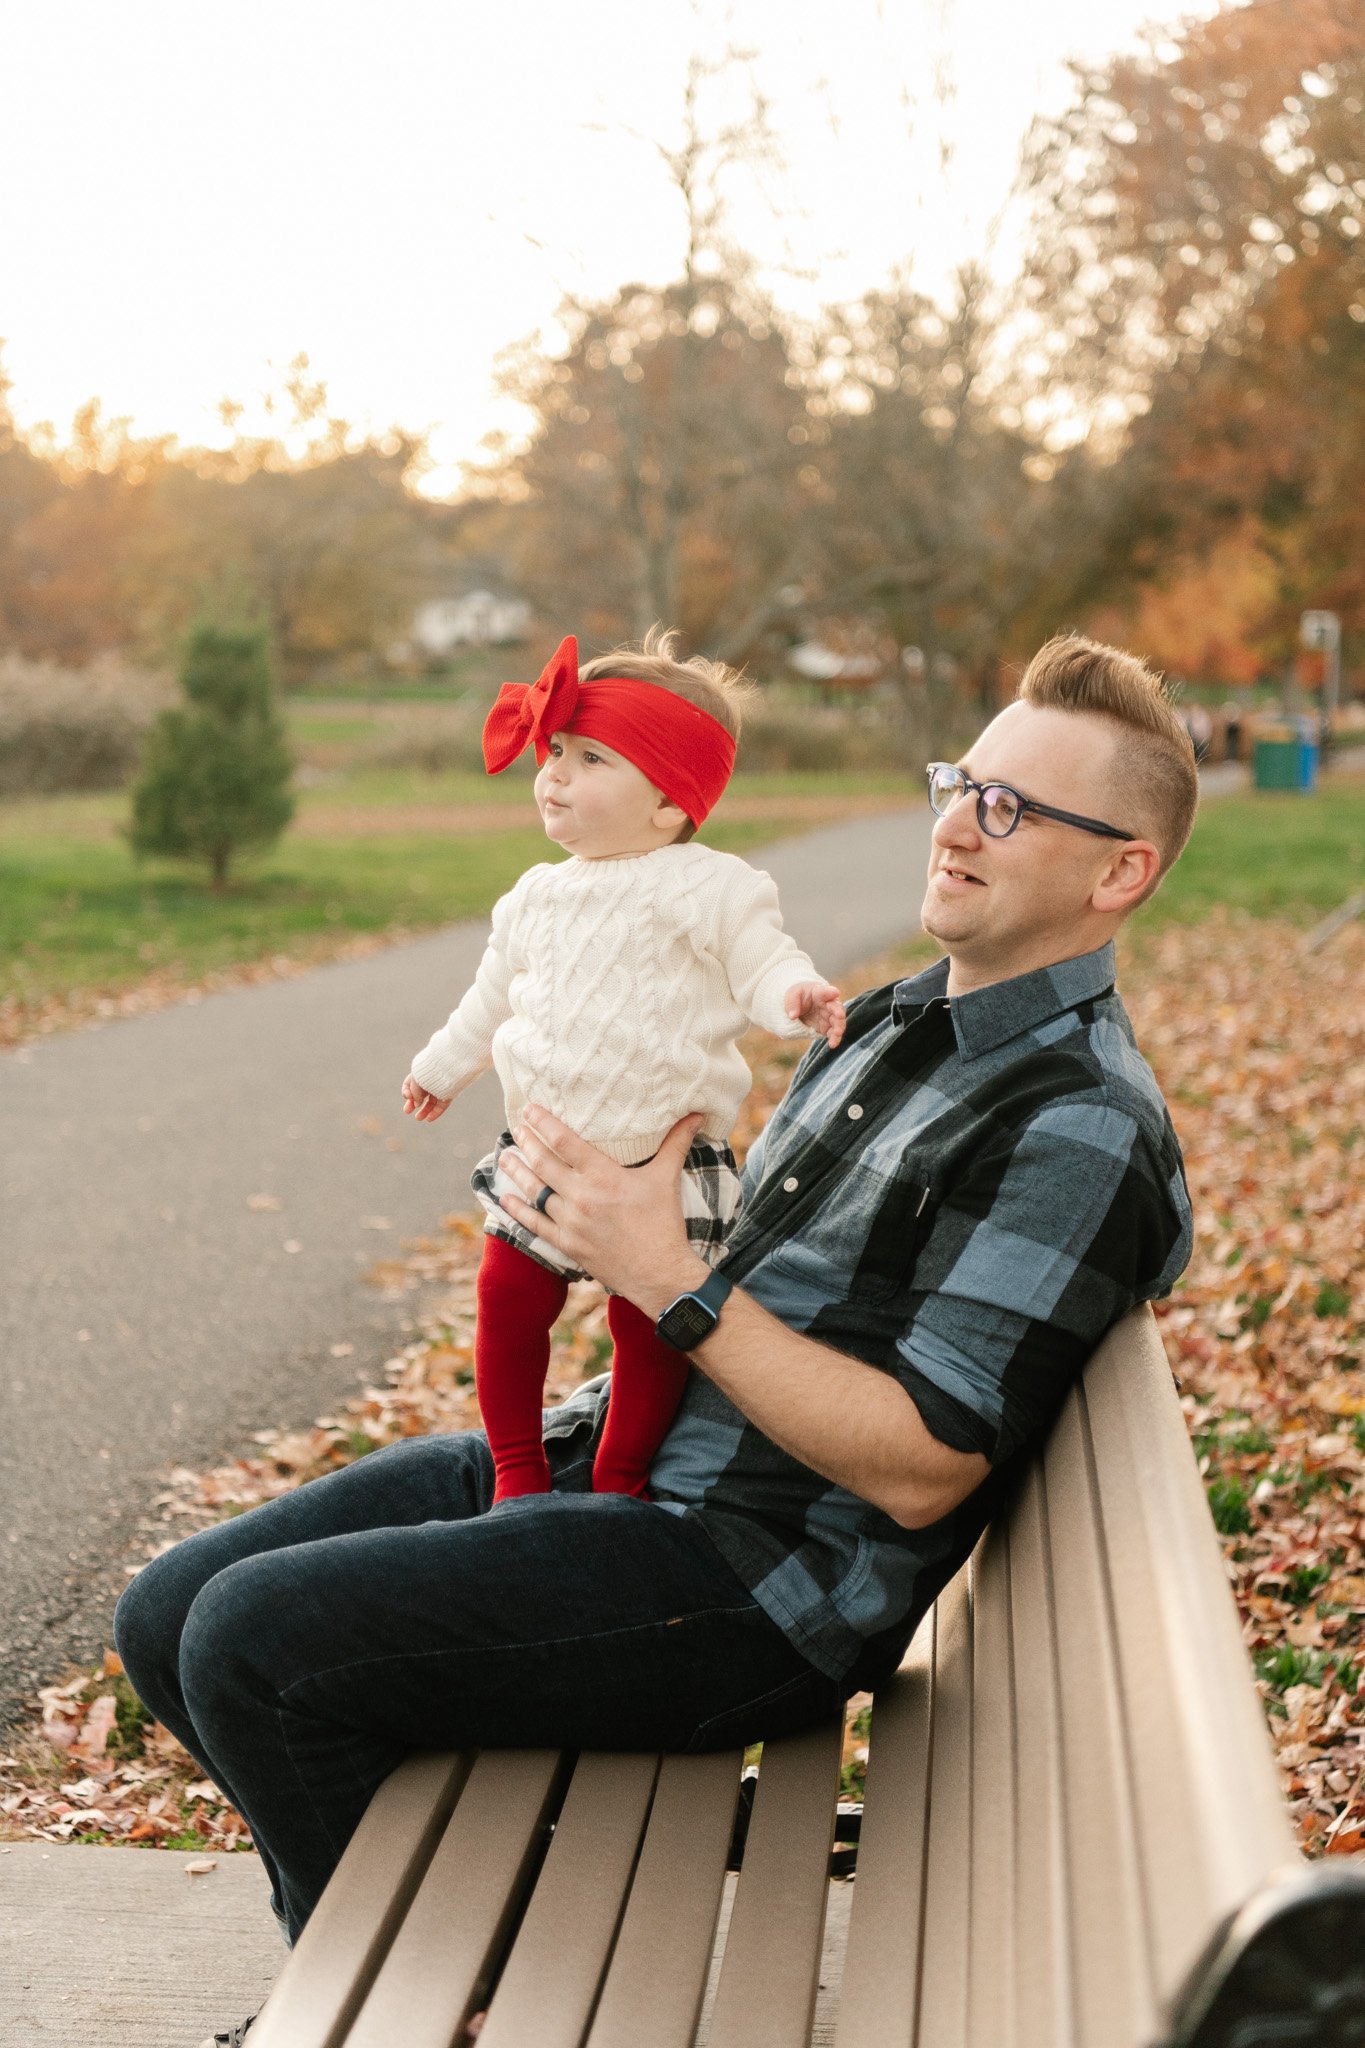  New Jersey family photographer Nicole Hawkins Photography captures a baby with her bow falling down on her eyes. candid family pic #NicoleHawkinsPhotography #NicoleHawkinsFamily #fallfamilyphotos #fallphotos #familyphotographerNJ #NJfallfamilypics 